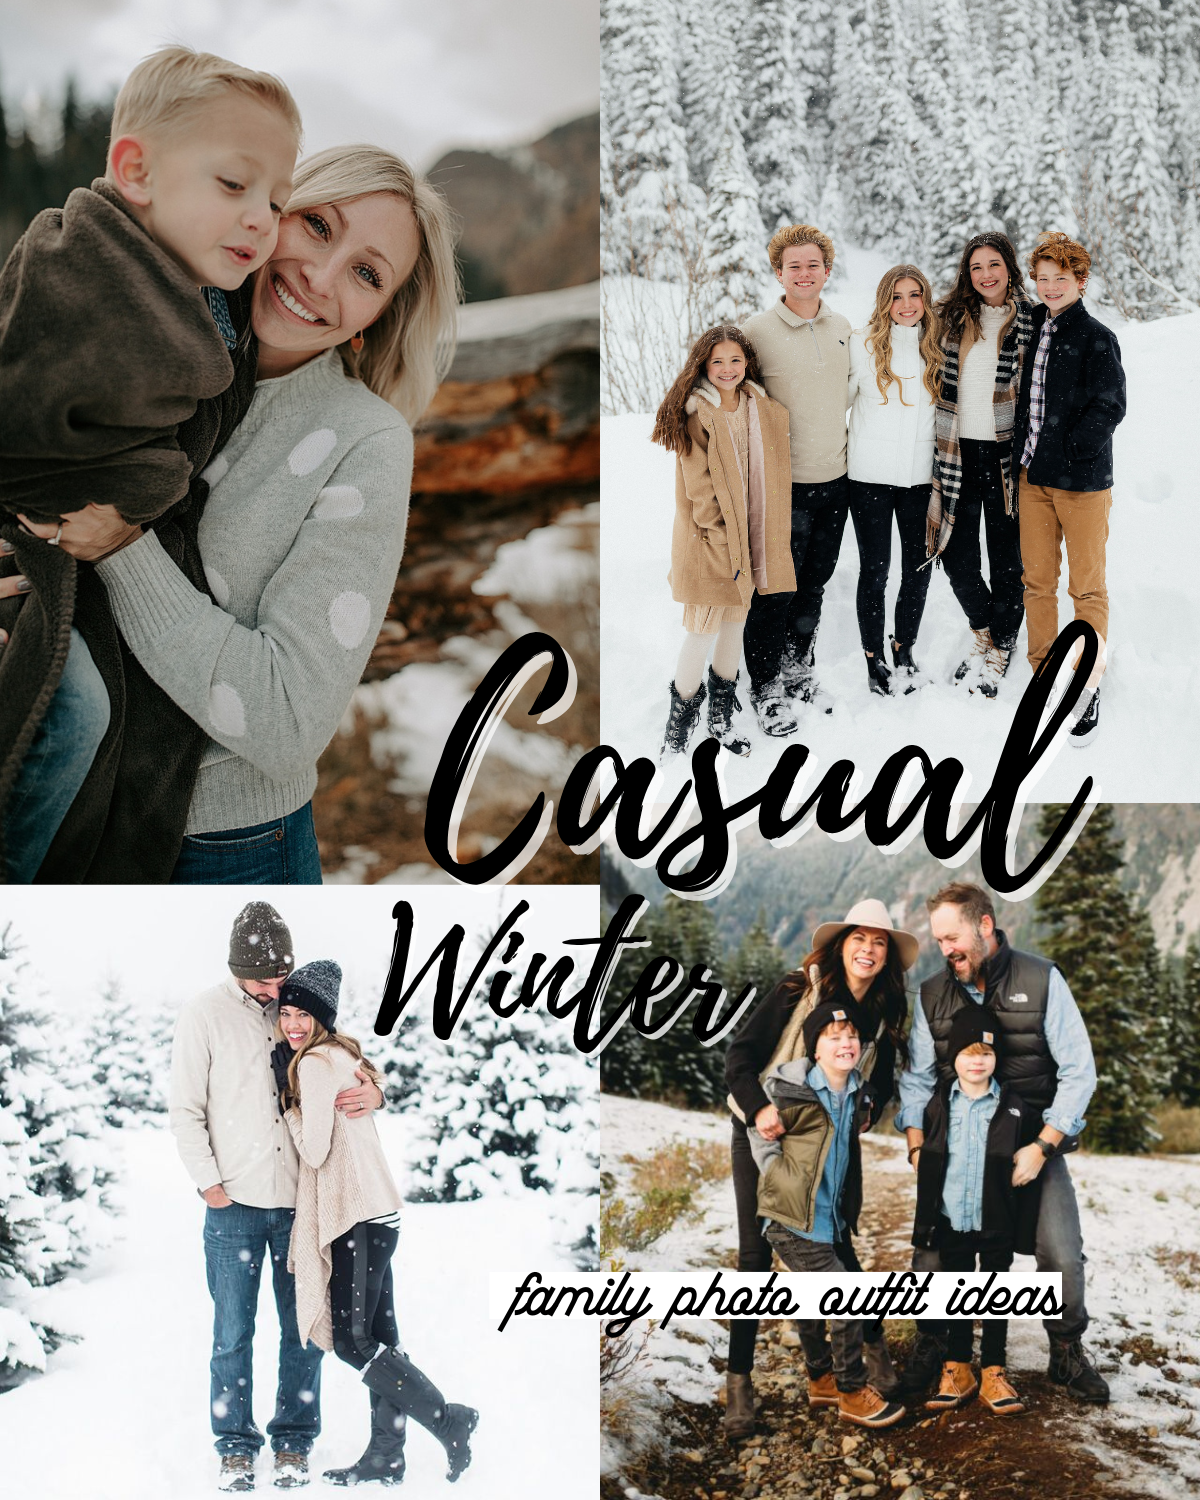 Four family photos with casual outfits